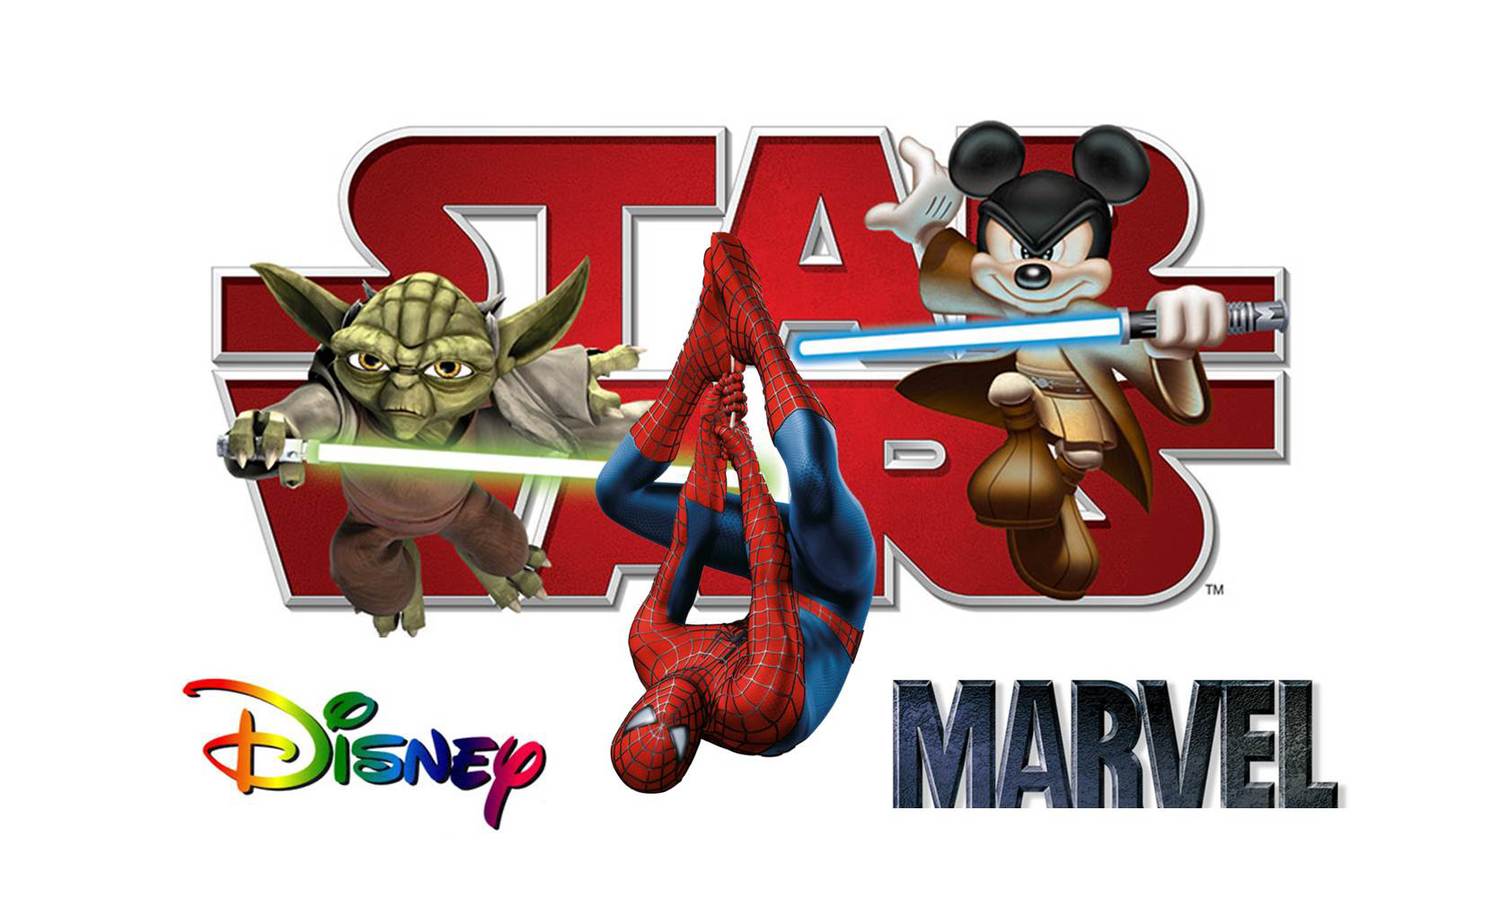 The Geeks OUT Podcast: Disney+ Marvel x Star Wars = $$$$$